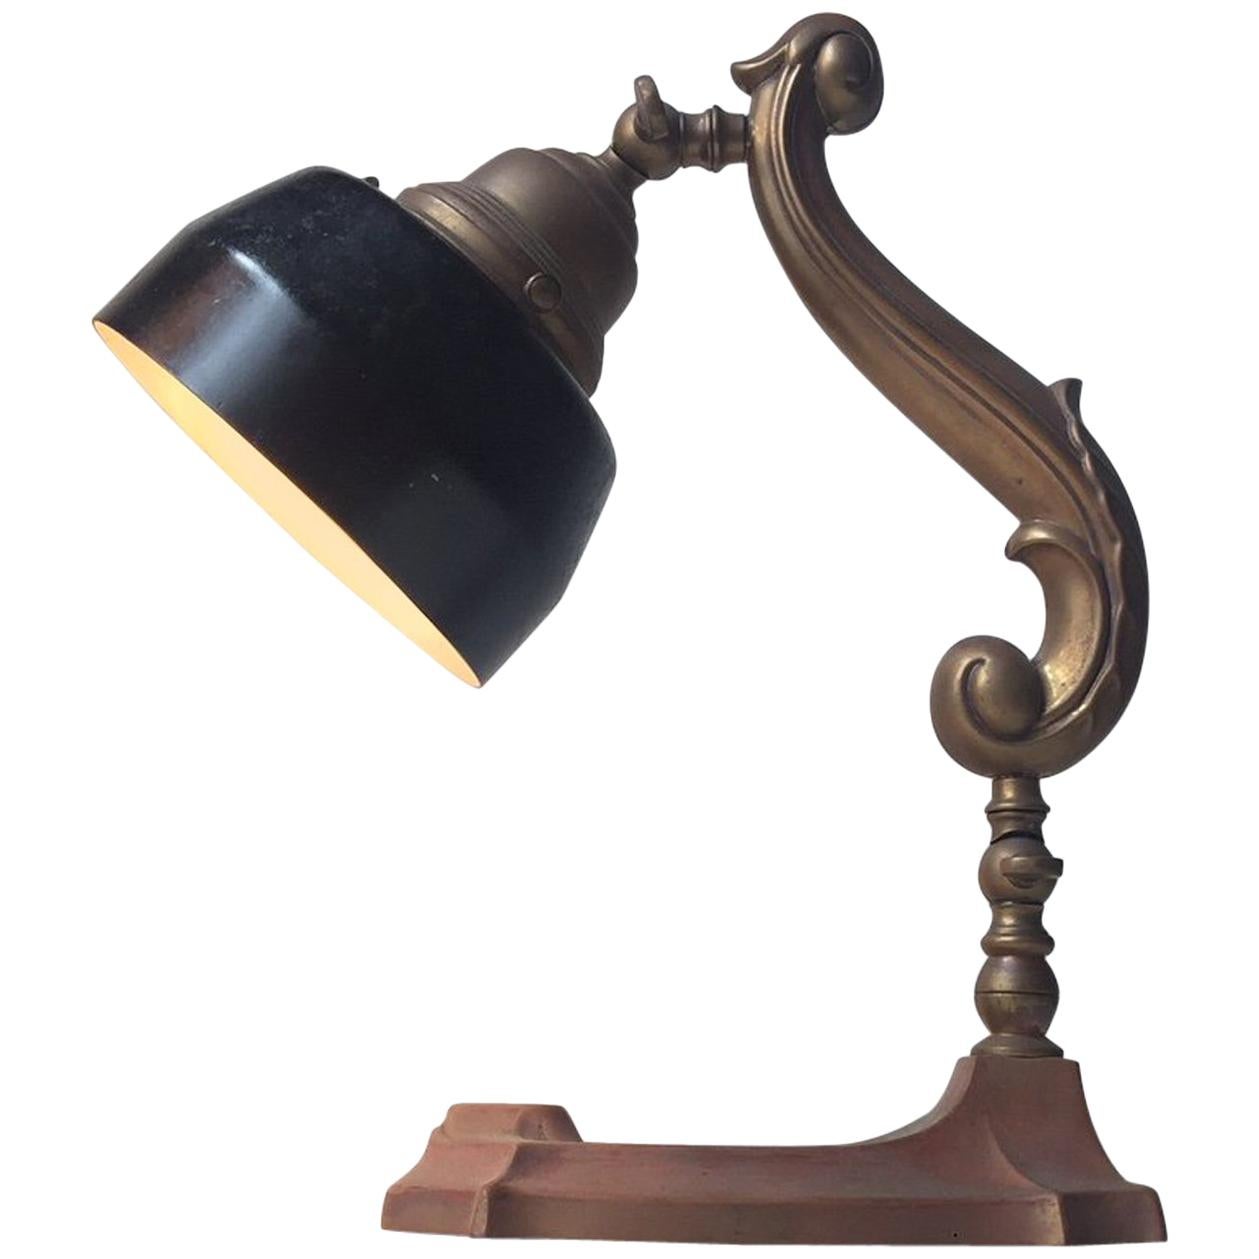 Danish 1920s Art Nouveau Patinated Copper and Brass Table Lamp For Sale